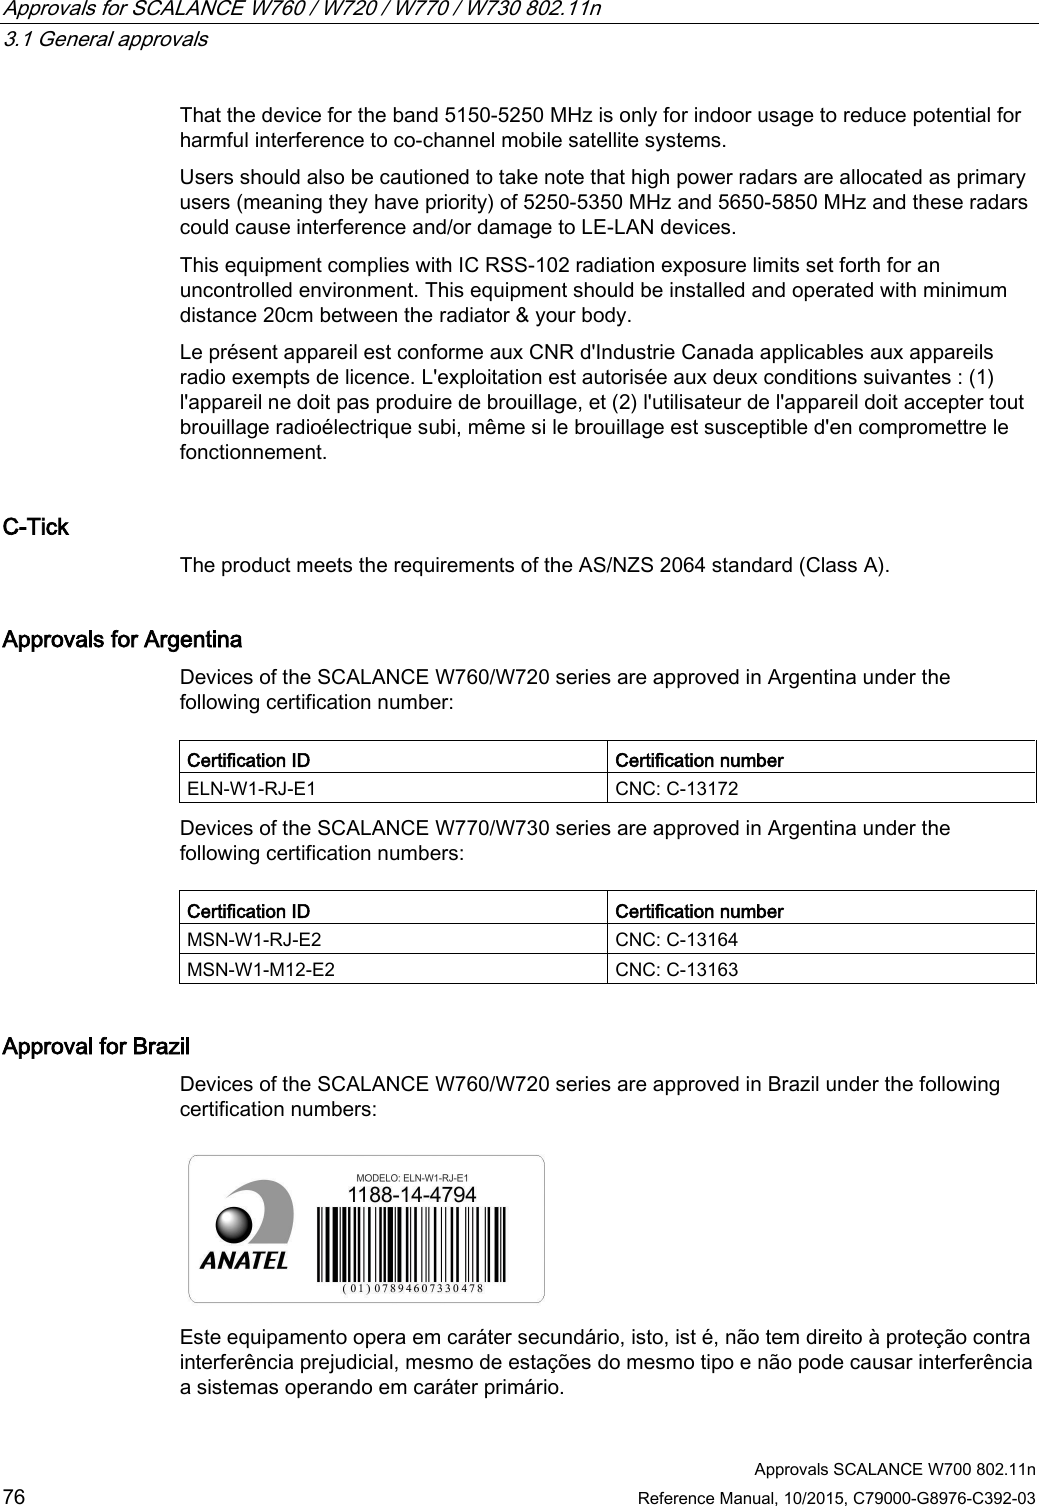 Approvals for SCALANCE W760 / W720 / W770 / W730 802.11n   3.1 General approvals  Approvals SCALANCE W700 802.11n 76 Reference Manual, 10/2015, C79000-G8976-C392-03 That the device for the band 5150-5250 MHz is only for indoor usage to reduce potential for harmful interference to co-channel mobile satellite systems. Users should also be cautioned to take note that high power radars are allocated as primary users (meaning they have priority) of 5250-5350 MHz and 5650-5850 MHz and these radars could cause interference and/or damage to LE-LAN devices. This equipment complies with IC RSS-102 radiation exposure limits set forth for an uncontrolled environment. This equipment should be installed and operated with minimum distance 20cm between the radiator &amp; your body. Le présent appareil est conforme aux CNR d&apos;Industrie Canada applicables aux appareils radio exempts de licence. L&apos;exploitation est autorisée aux deux conditions suivantes : (1) l&apos;appareil ne doit pas produire de brouillage, et (2) l&apos;utilisateur de l&apos;appareil doit accepter tout brouillage radioélectrique subi, même si le brouillage est susceptible d&apos;en compromettre le fonctionnement. C-Tick The product meets the requirements of the AS/NZS 2064 standard (Class A). Approvals for Argentina Devices of the SCALANCE W760/W720 series are approved in Argentina under the following certification number:  Certification ID Certification number ELN-W1-RJ-E1 CNC: C-13172 Devices of the SCALANCE W770/W730 series are approved in Argentina under the following certification numbers:  Certification ID Certification number MSN-W1-RJ-E2 CNC: C-13164 MSN-W1-M12-E2 CNC: C-13163 Approval for Brazil Devices of the SCALANCE W760/W720 series are approved in Brazil under the following certification numbers:  Este equipamento opera em caráter secundário, isto, ist é, não tem direito à proteção contra interferência prejudicial, mesmo de estações do mesmo tipo e não pode causar interferência a sistemas operando em caráter primário.  